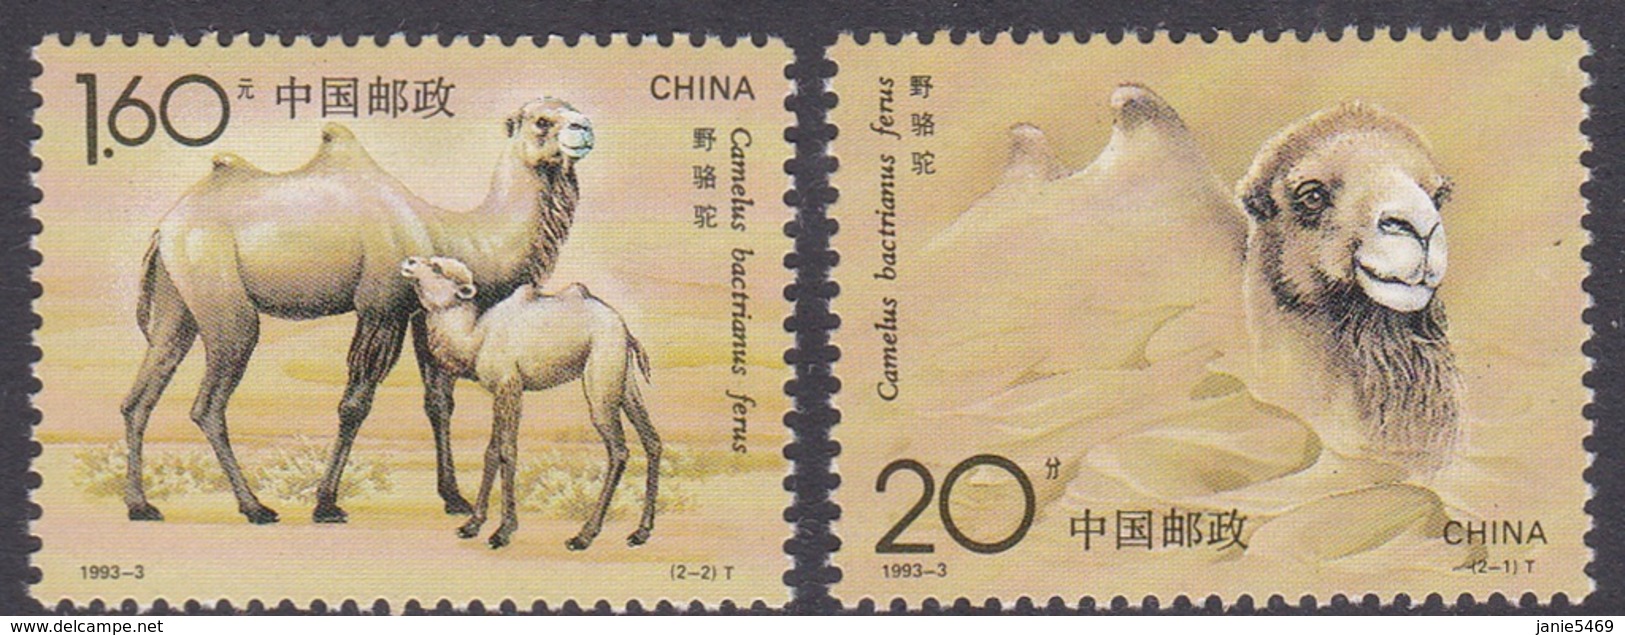 China People's Republic SG 3838-3839 1993 Bactrian Camel, Mint Never Hinged - Neufs